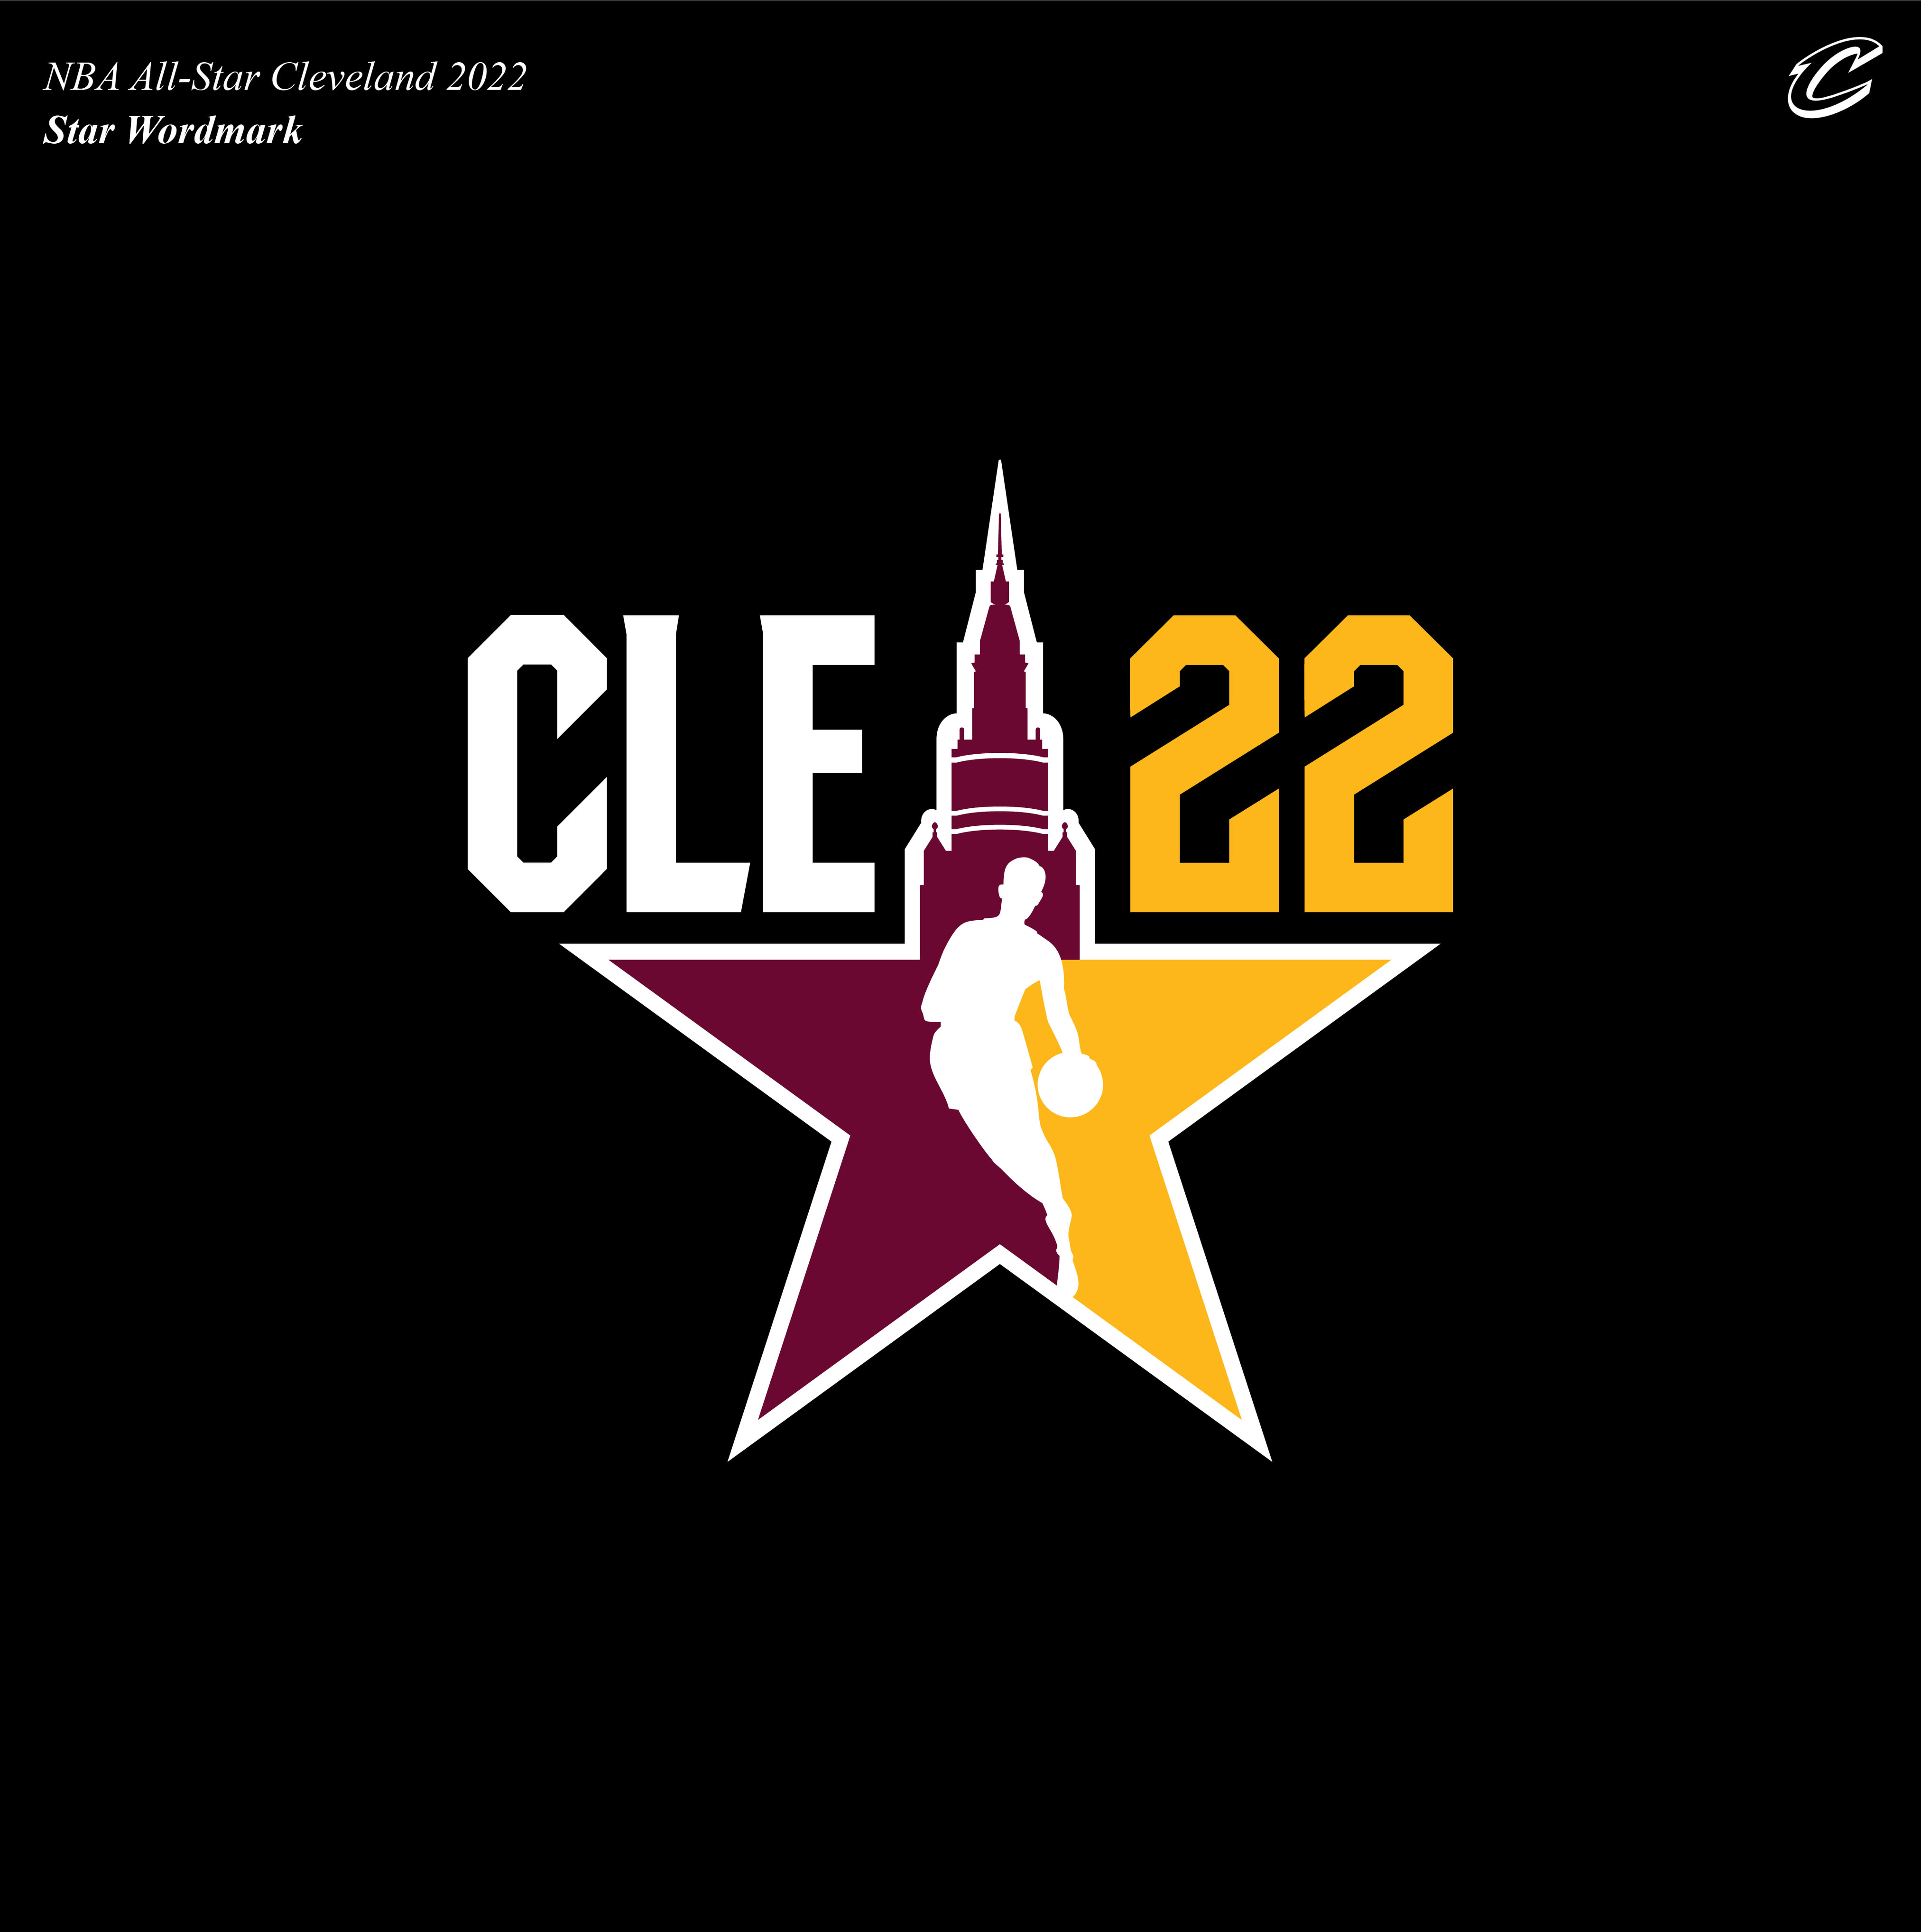 Cleveland Cavaliers NBA All Star Cleveland 2022 Logos Were Developed In House By Our Cavs Design Team At The Creative Direction Of In Collaboration With The